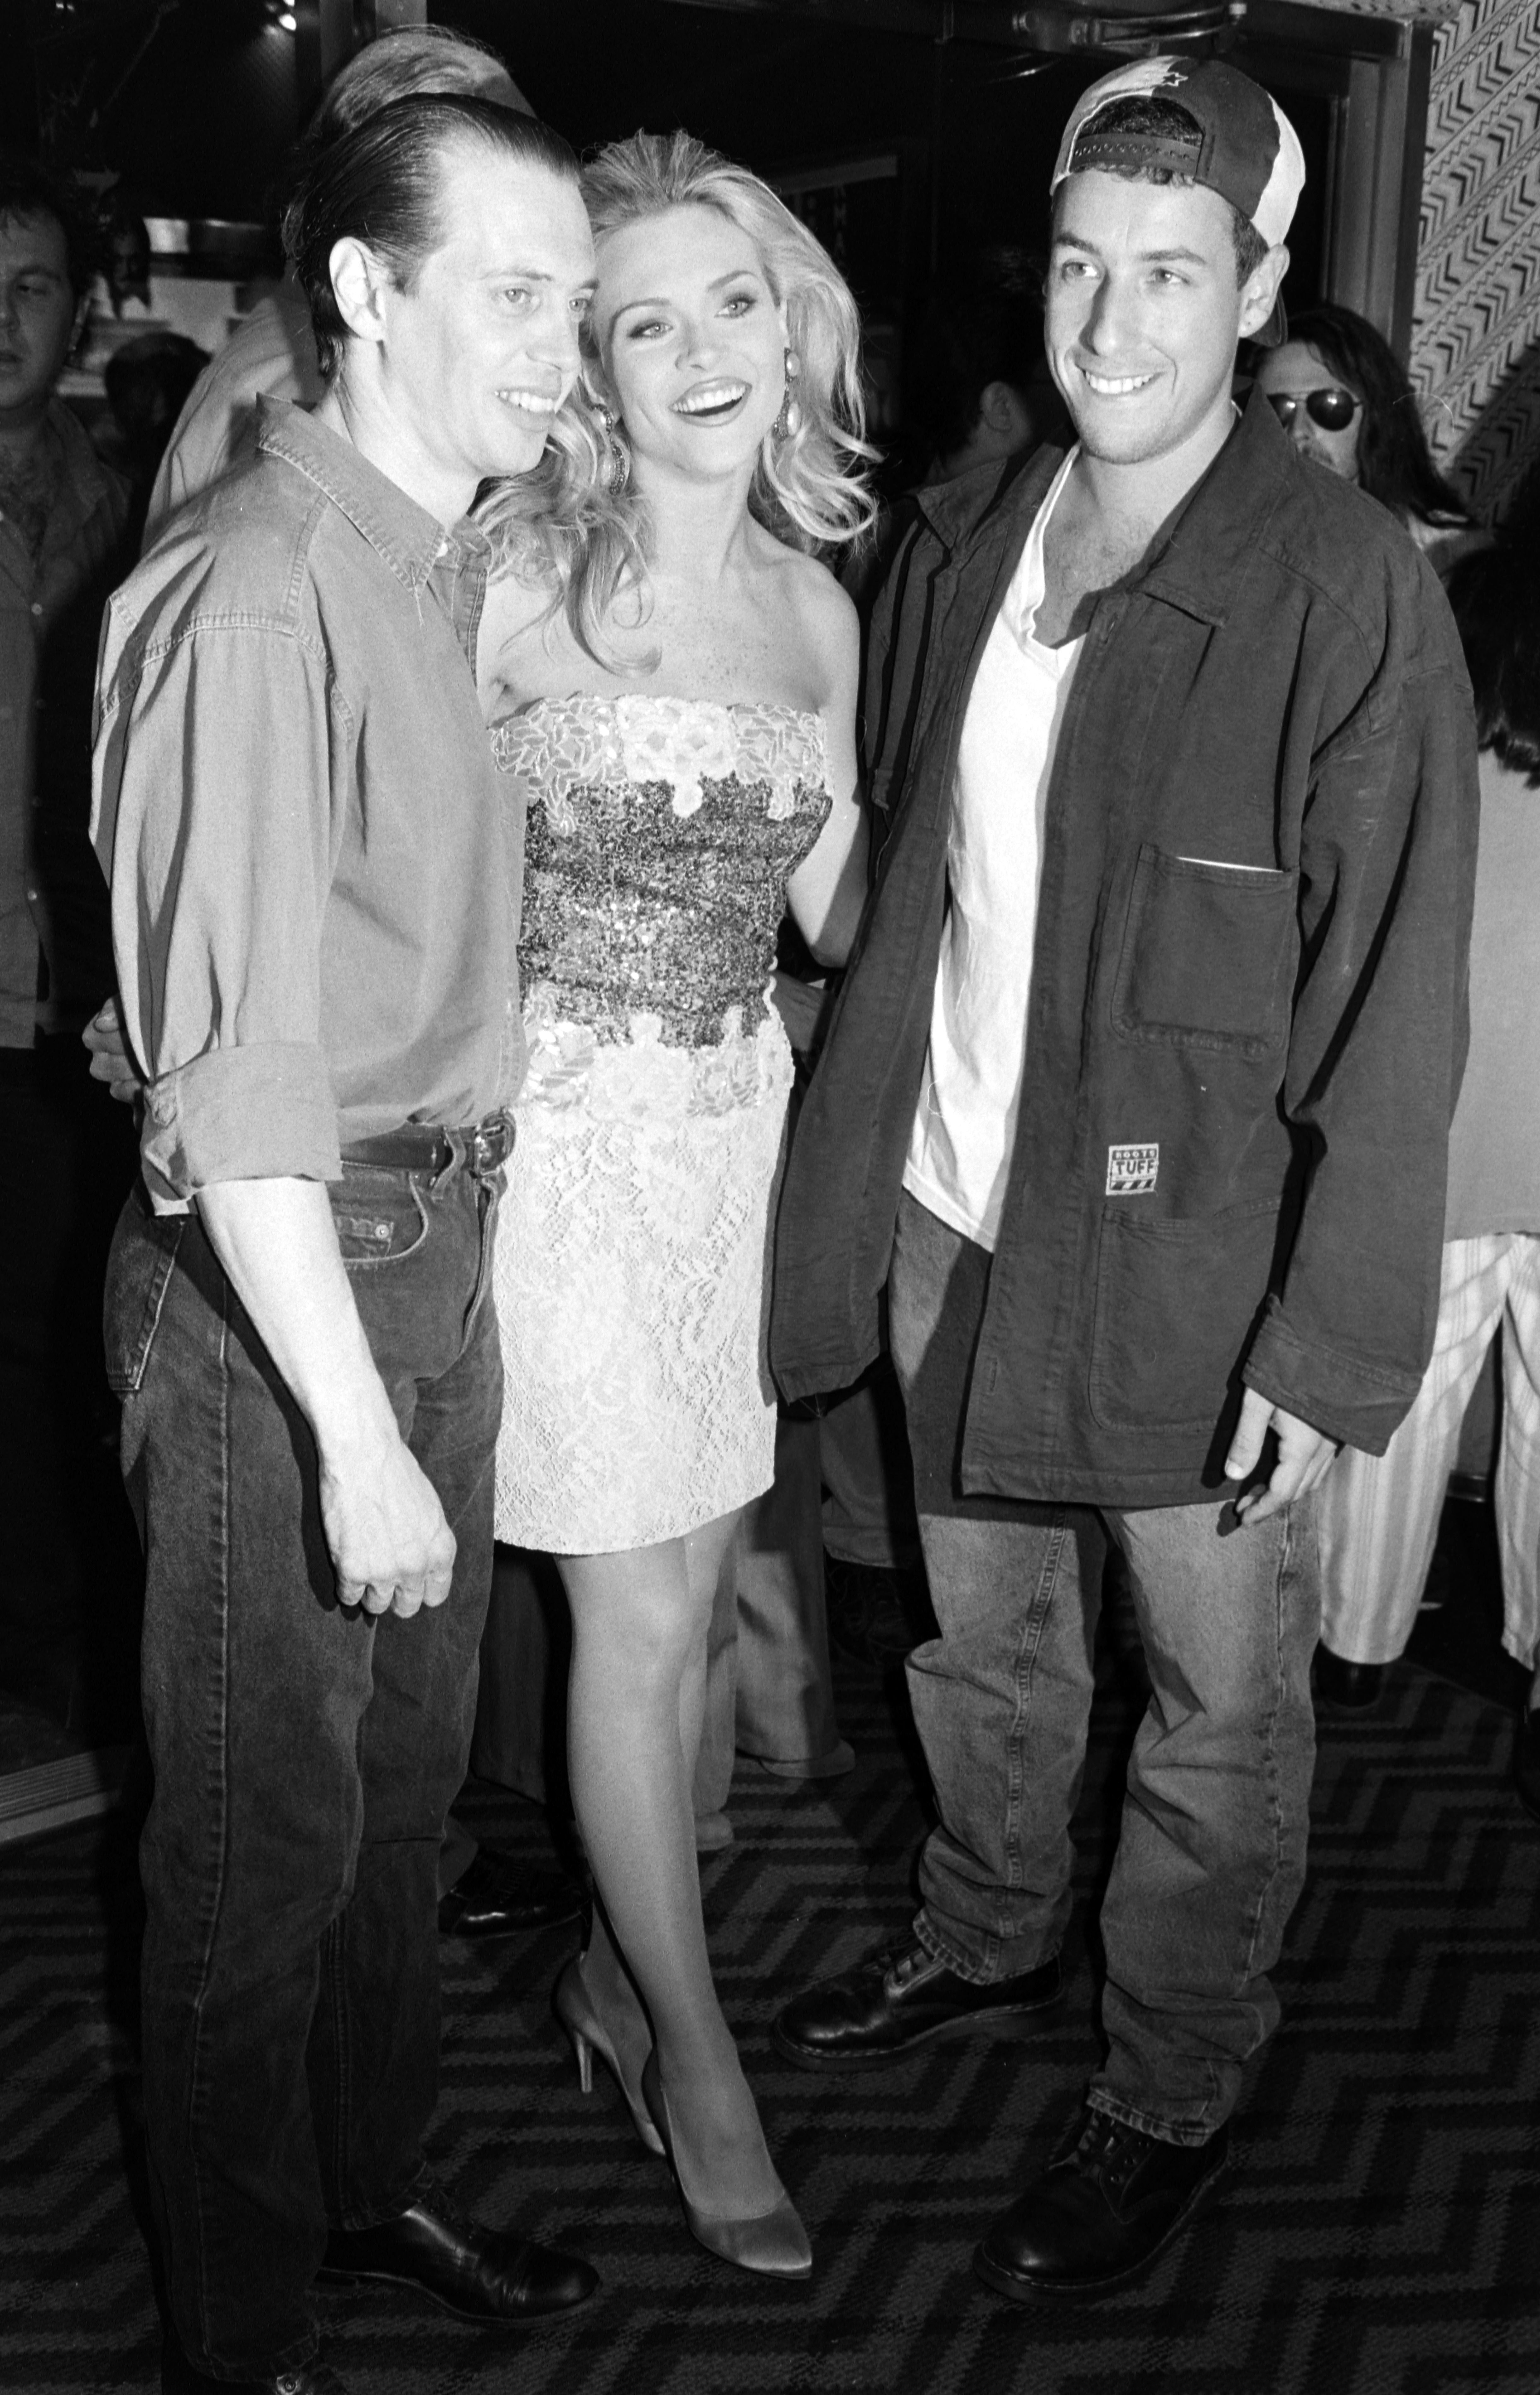 Steve Buscemi, Amy Locane, and Adam Sandler at the premiere of "Airheads" in New York City on August 1, 1994 | Source: Getty Images